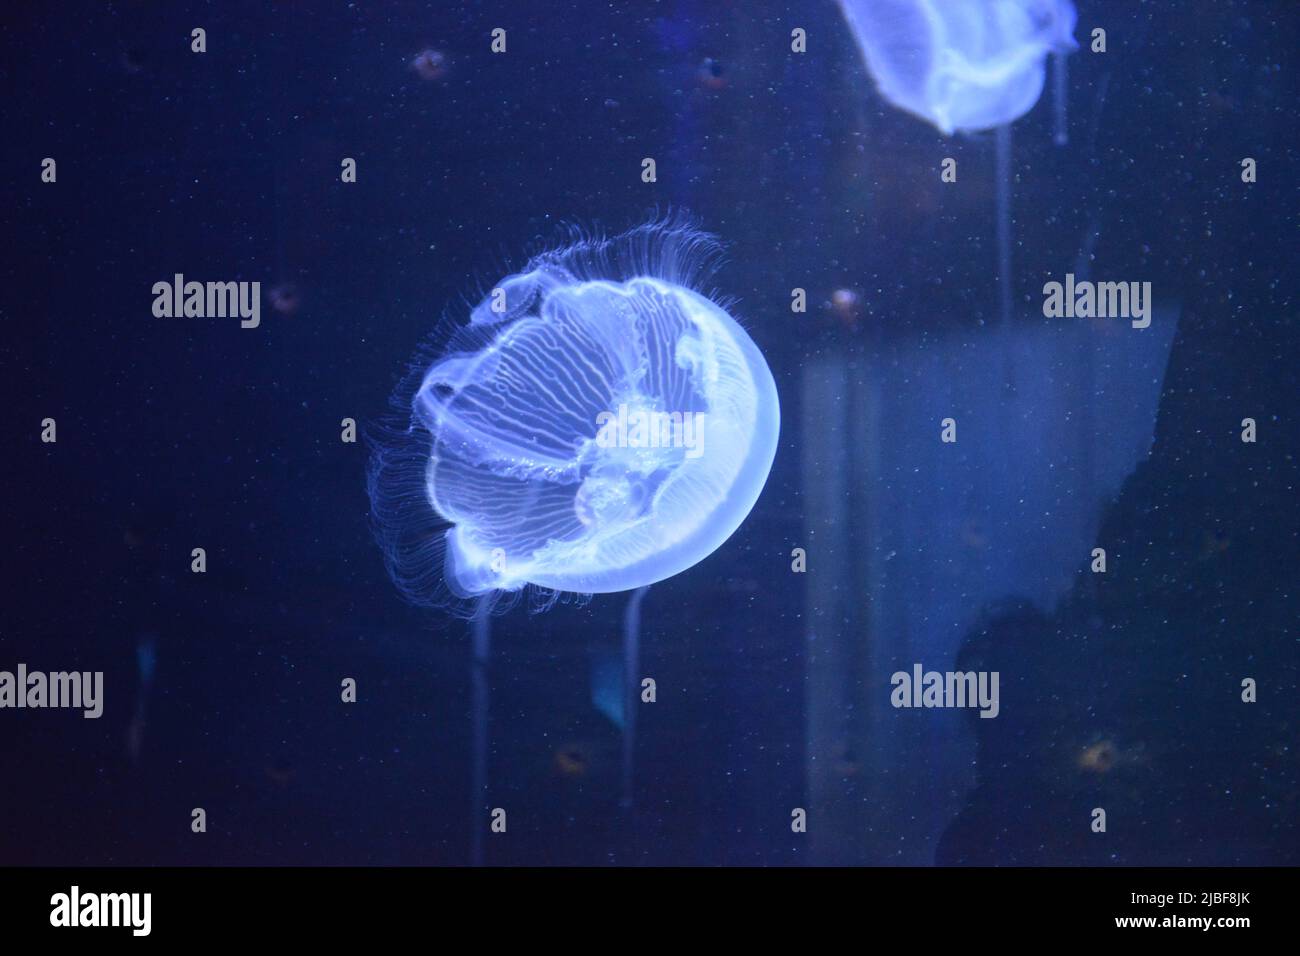 A closeup shot of jellyfishes Stock Photo